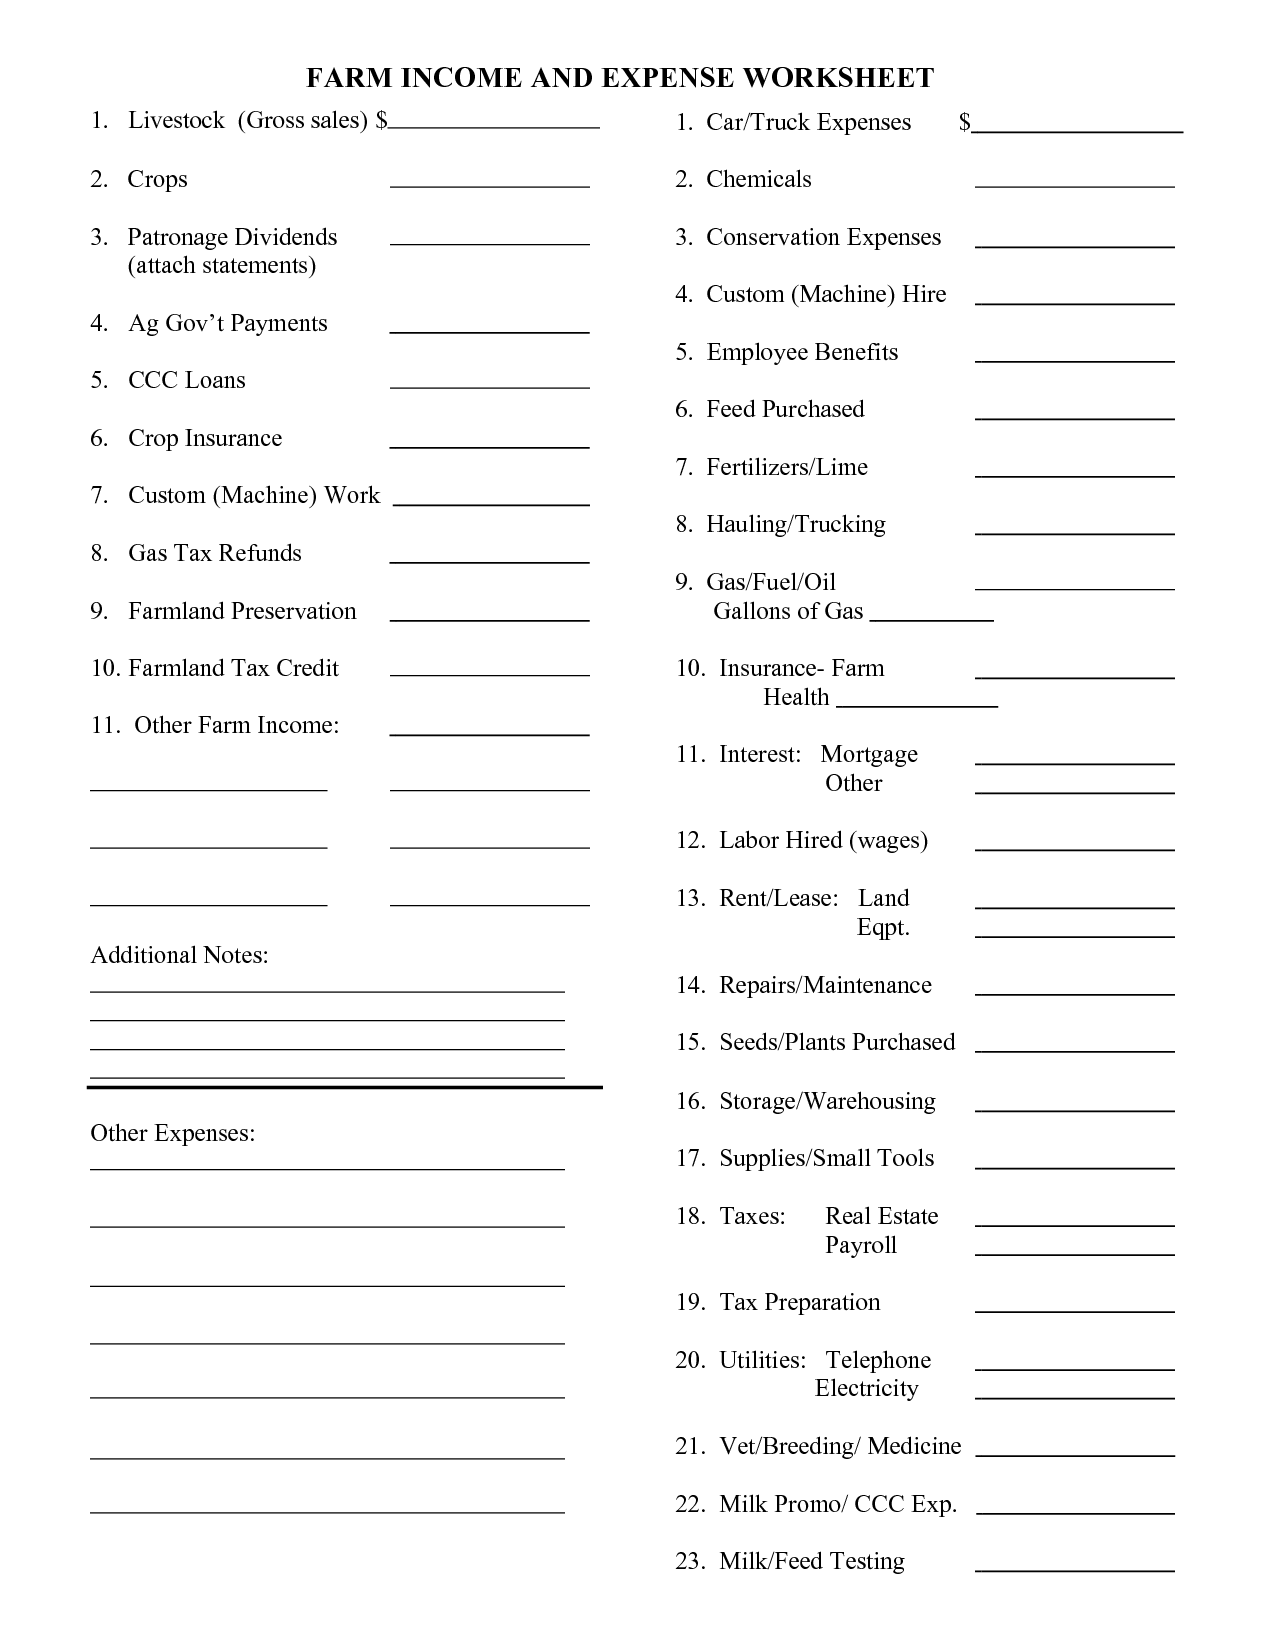 28 Farm Income And Expense Worksheet - Worksheet Project List